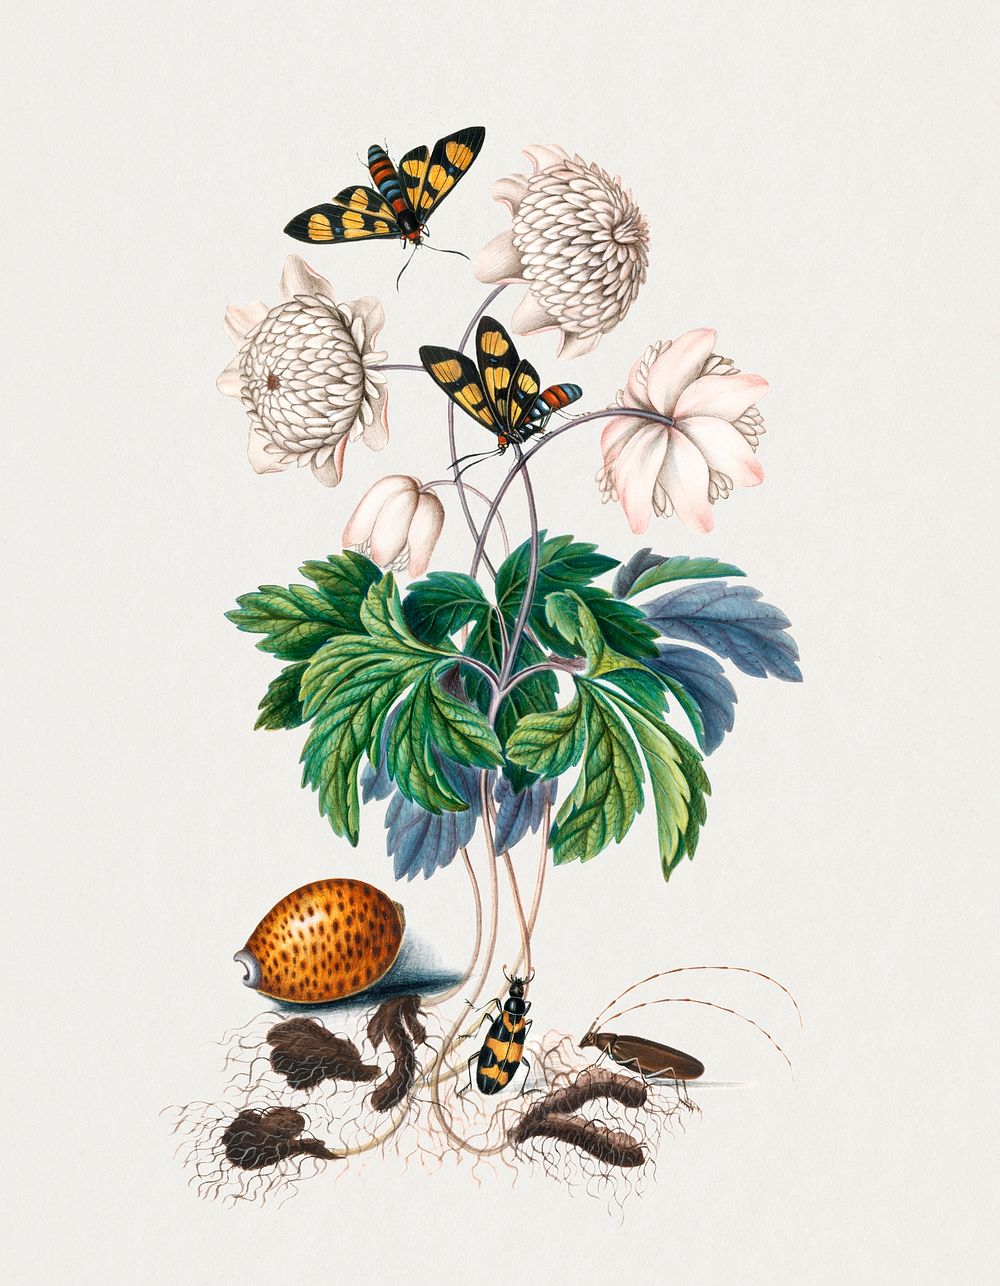 Double flower cultivar of Wood anemone, Painted handmaiden moth, Blister beetle, Spanish fly and Sawyer beetle from the…